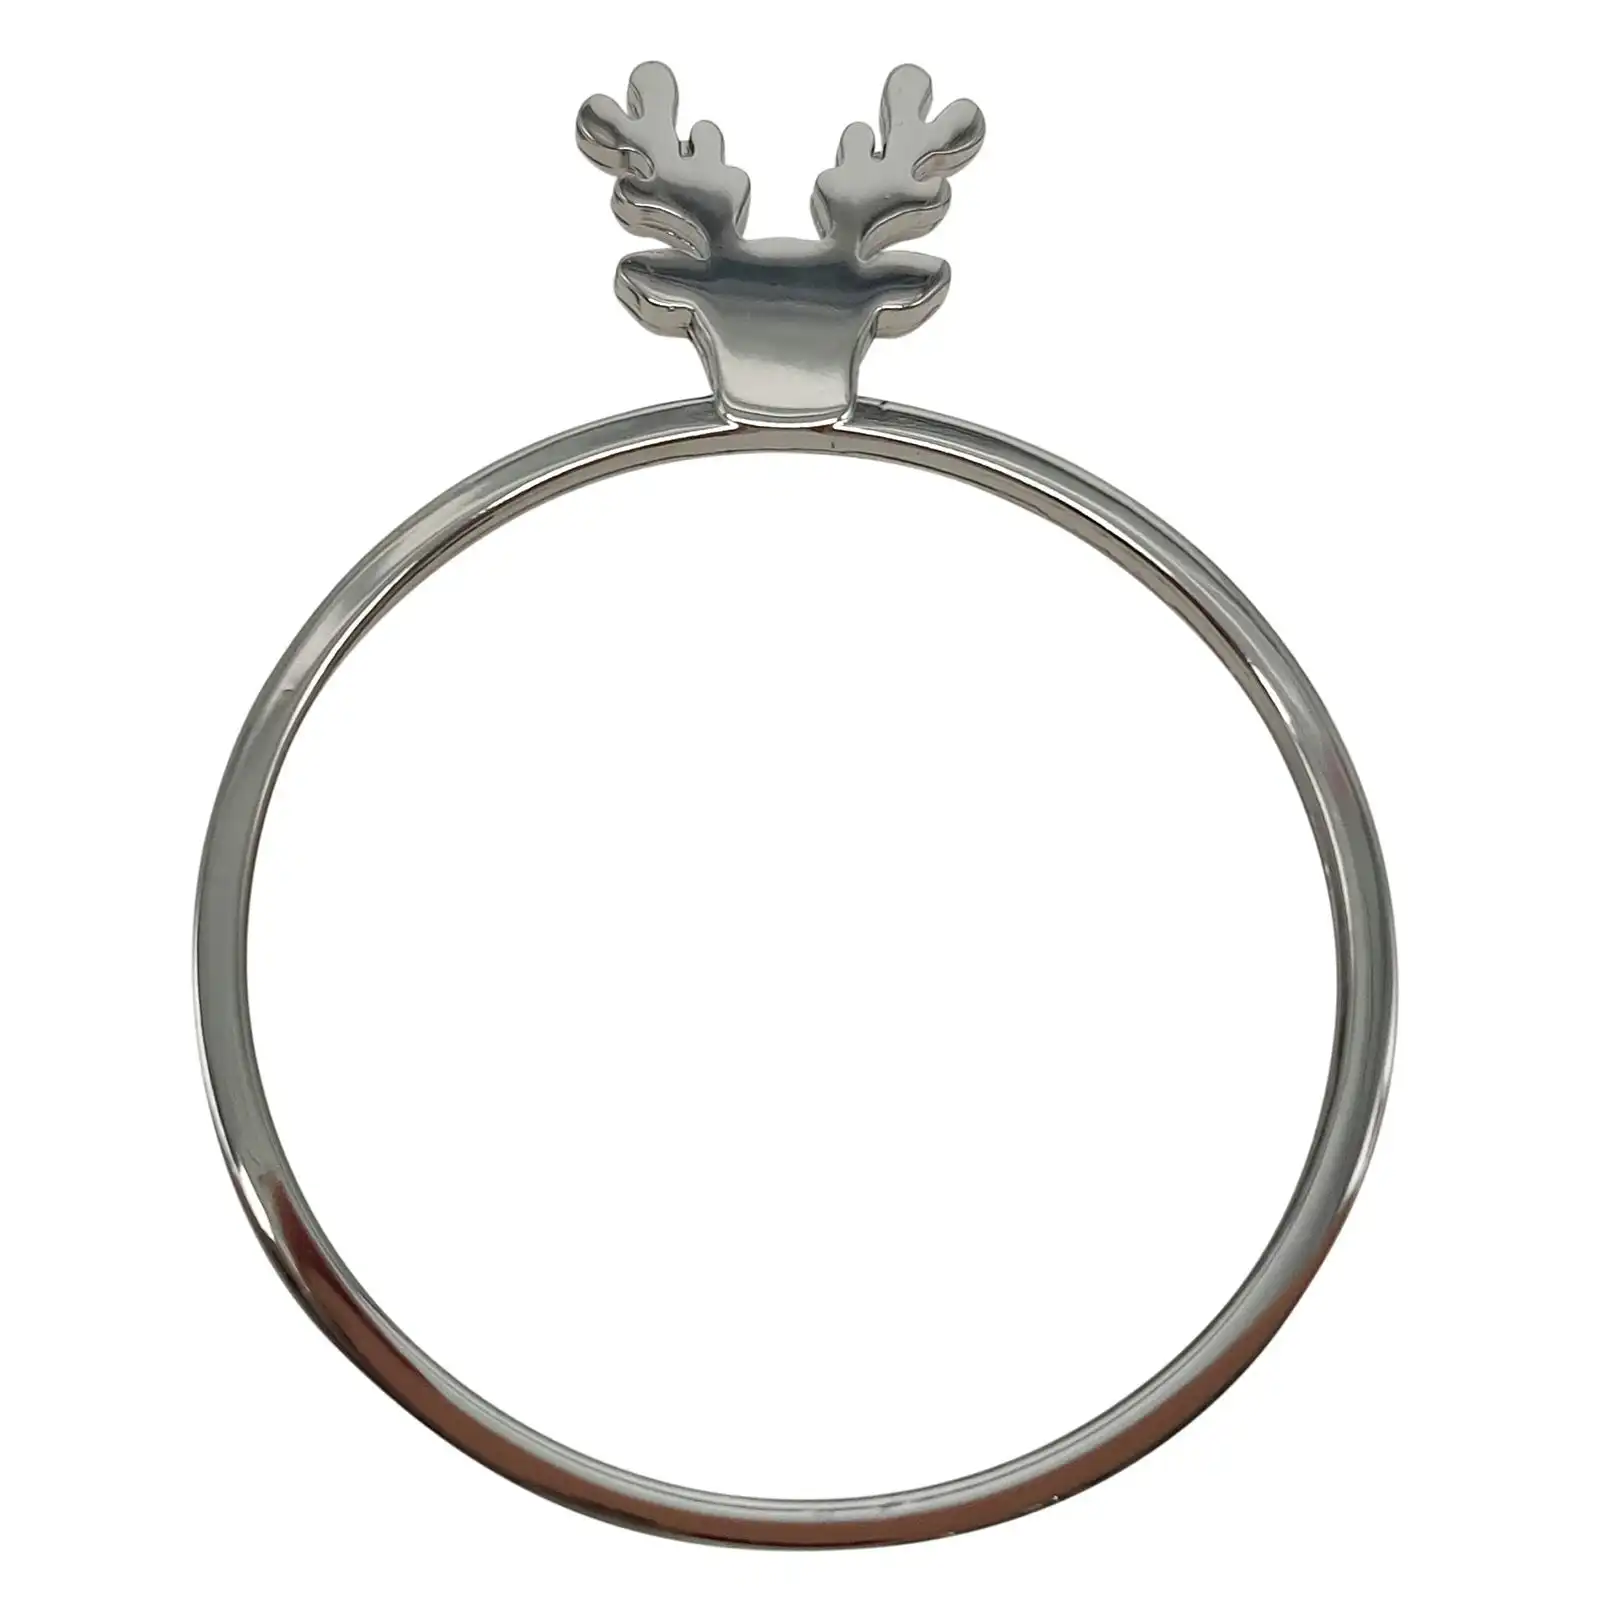 Bread and Butter Napkin Rings - Stag Head - Silver - 4 Pack | ABM | Lasoo